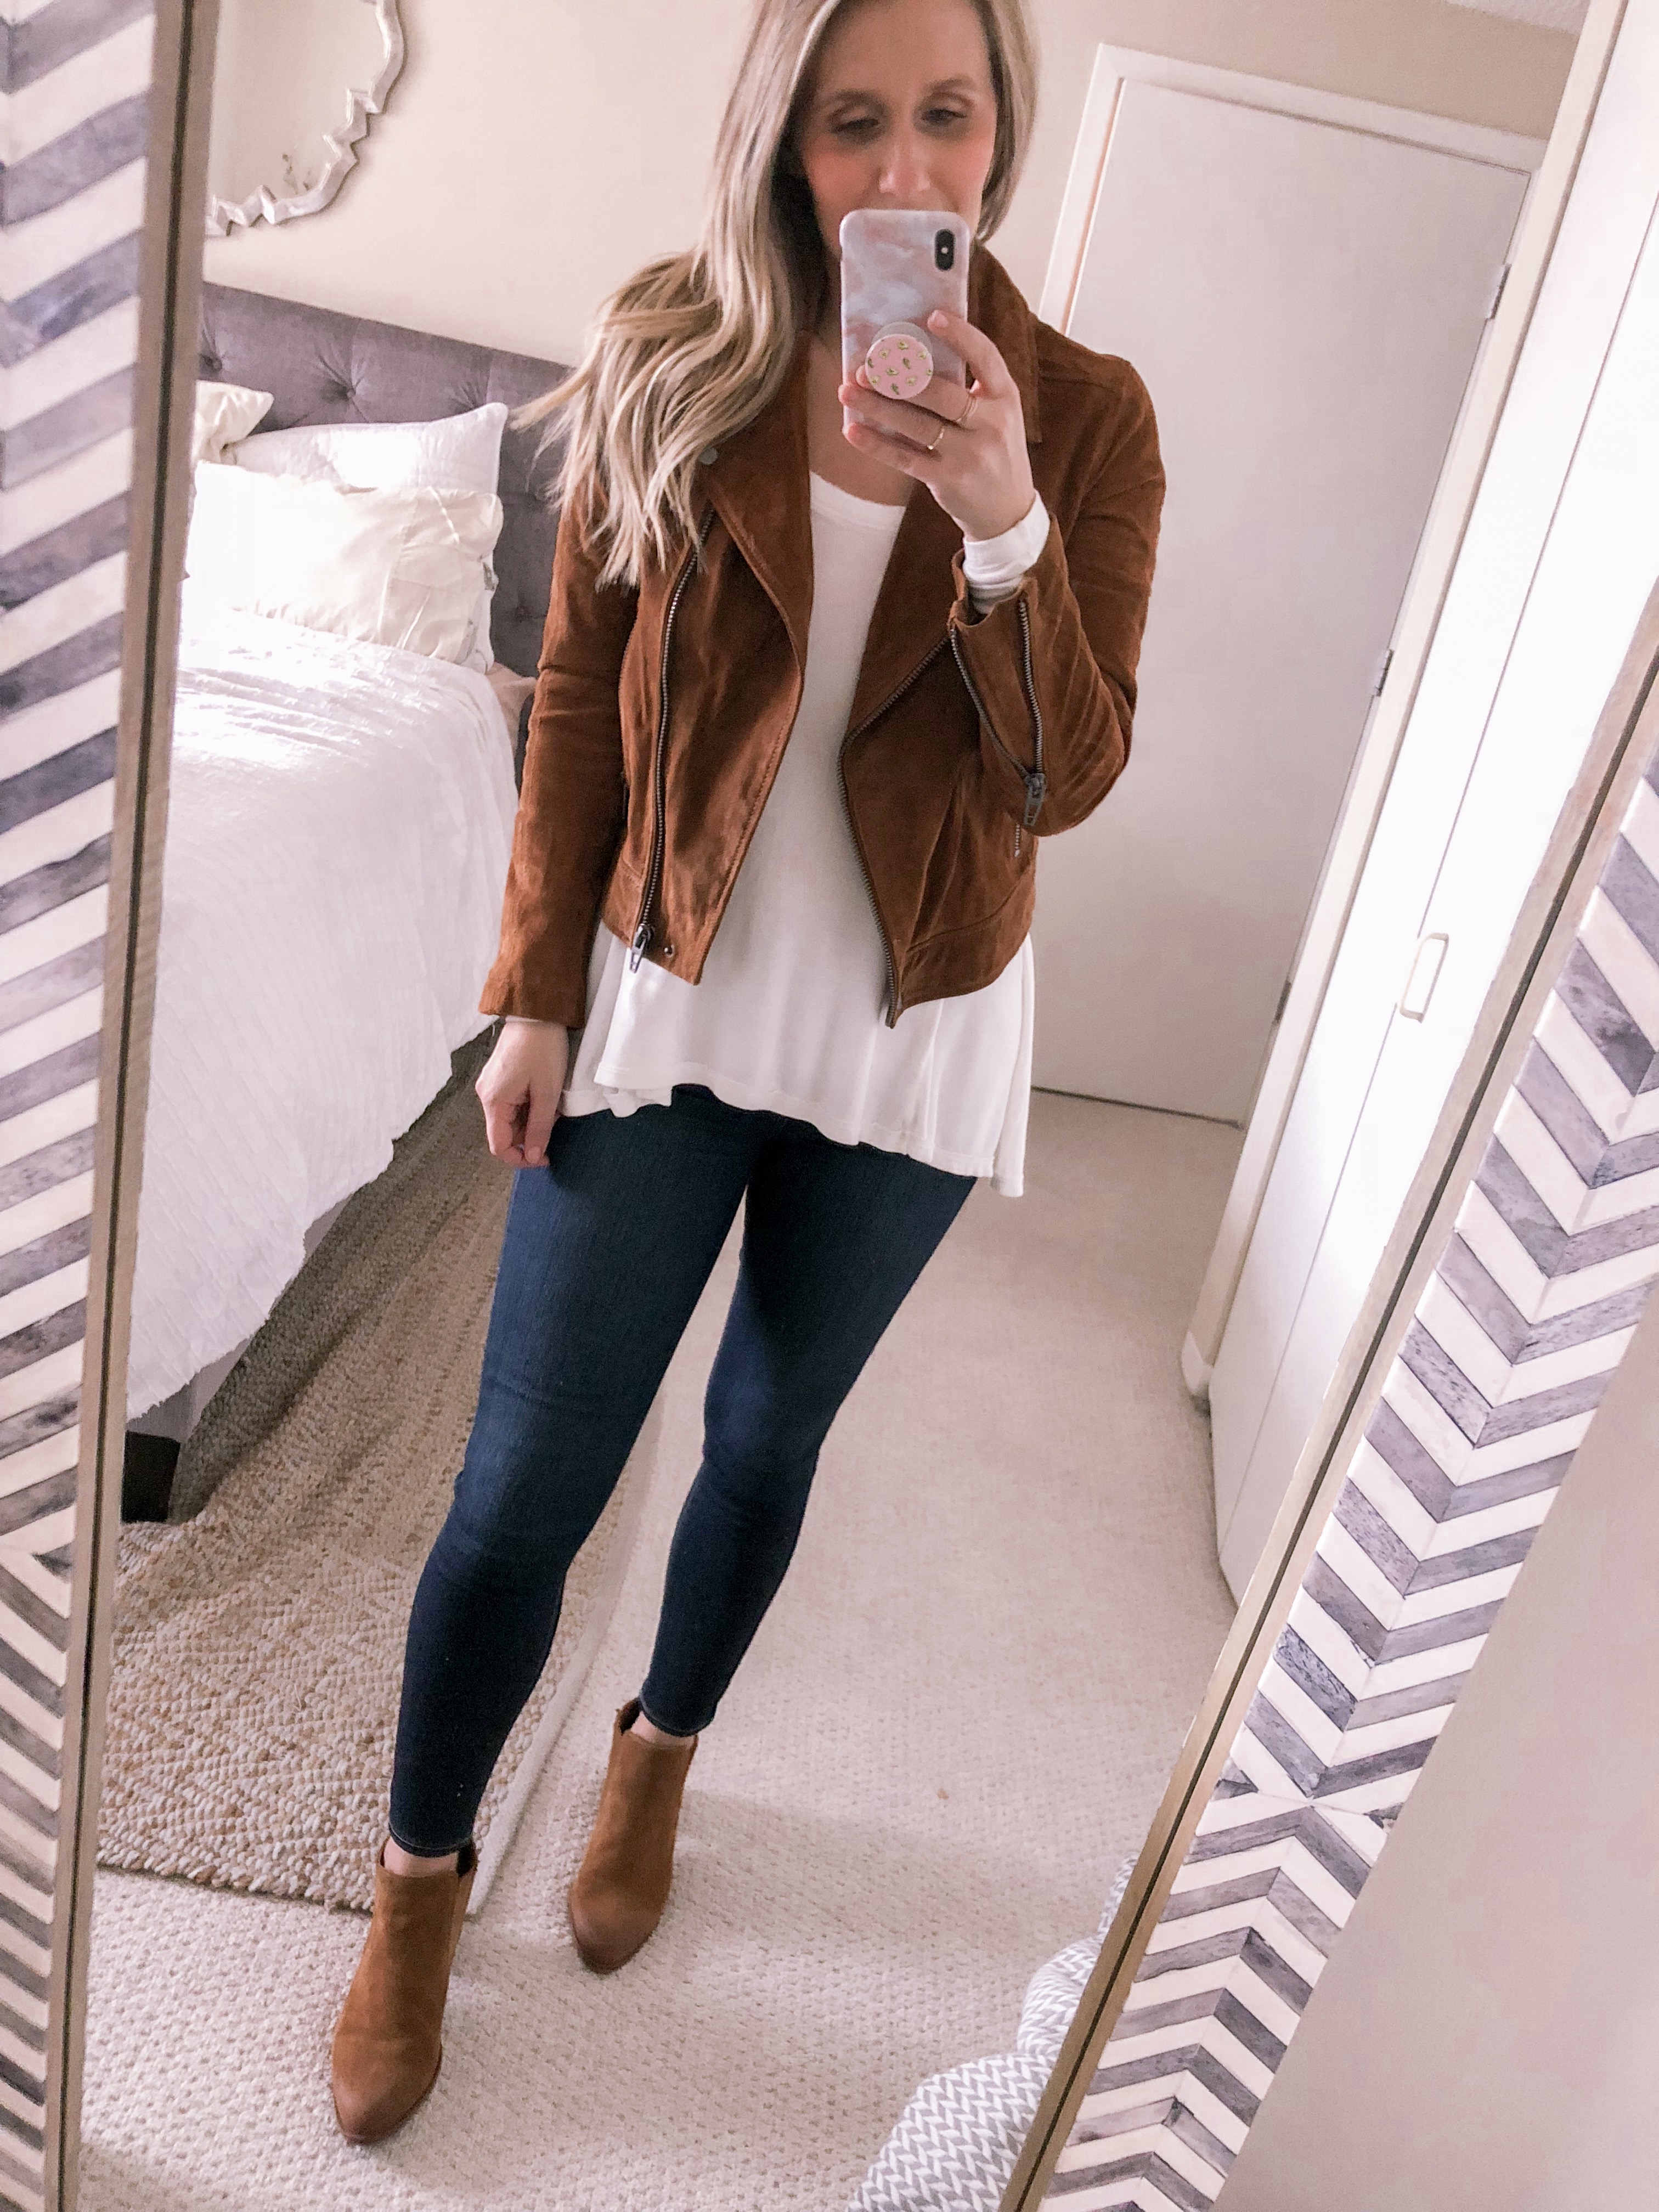 Popular Chicago fashion blogger Visions of Vogue styles a suede moto jacket with the Free People January tee for under $50 as an office casual outfit idea.